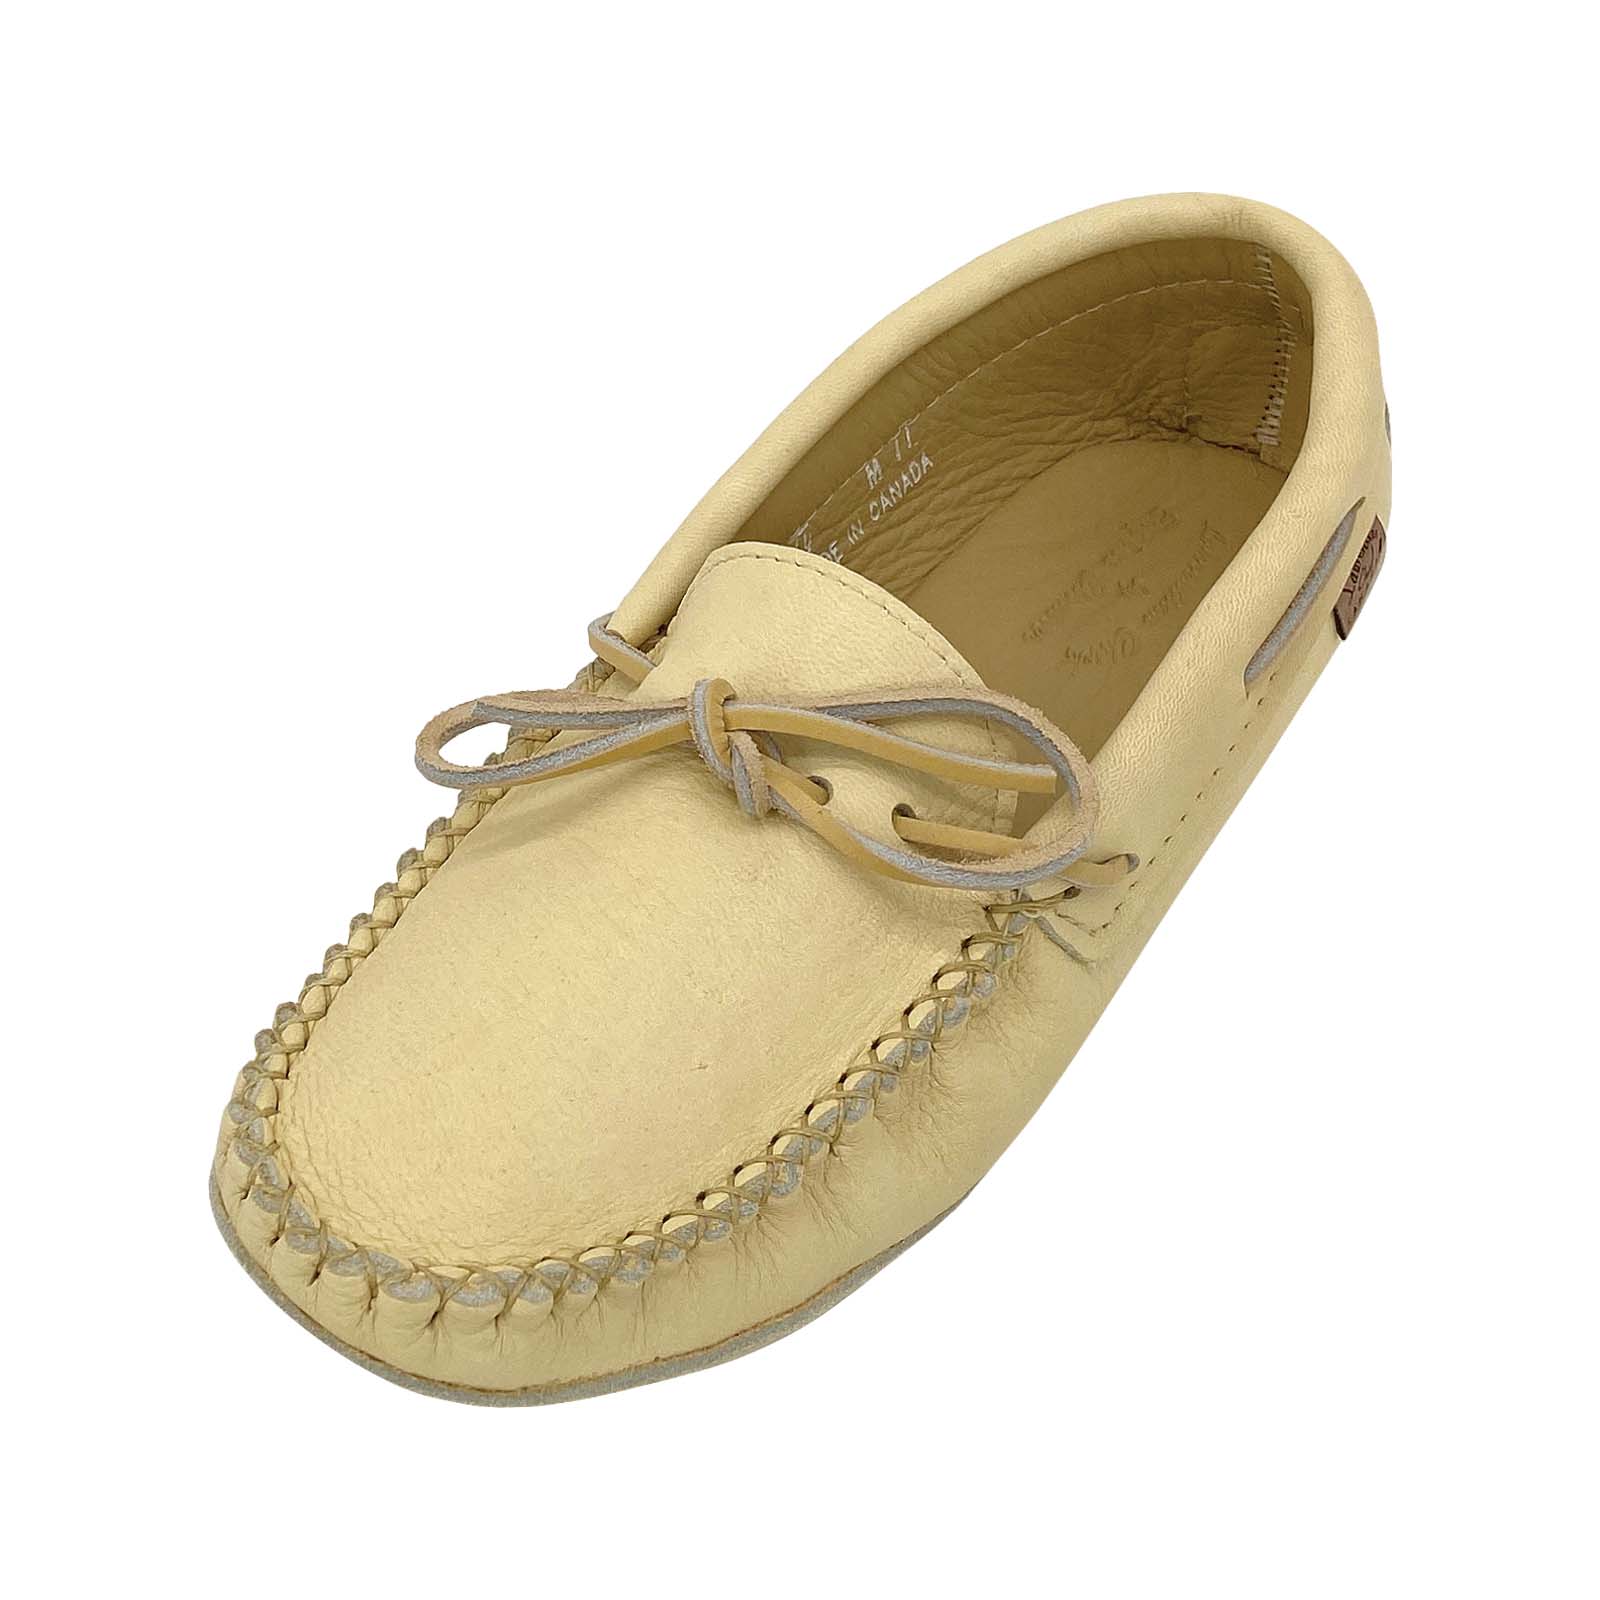 Men's Sole Caribou Deer Tan Leather Moccasin Slippers Leather